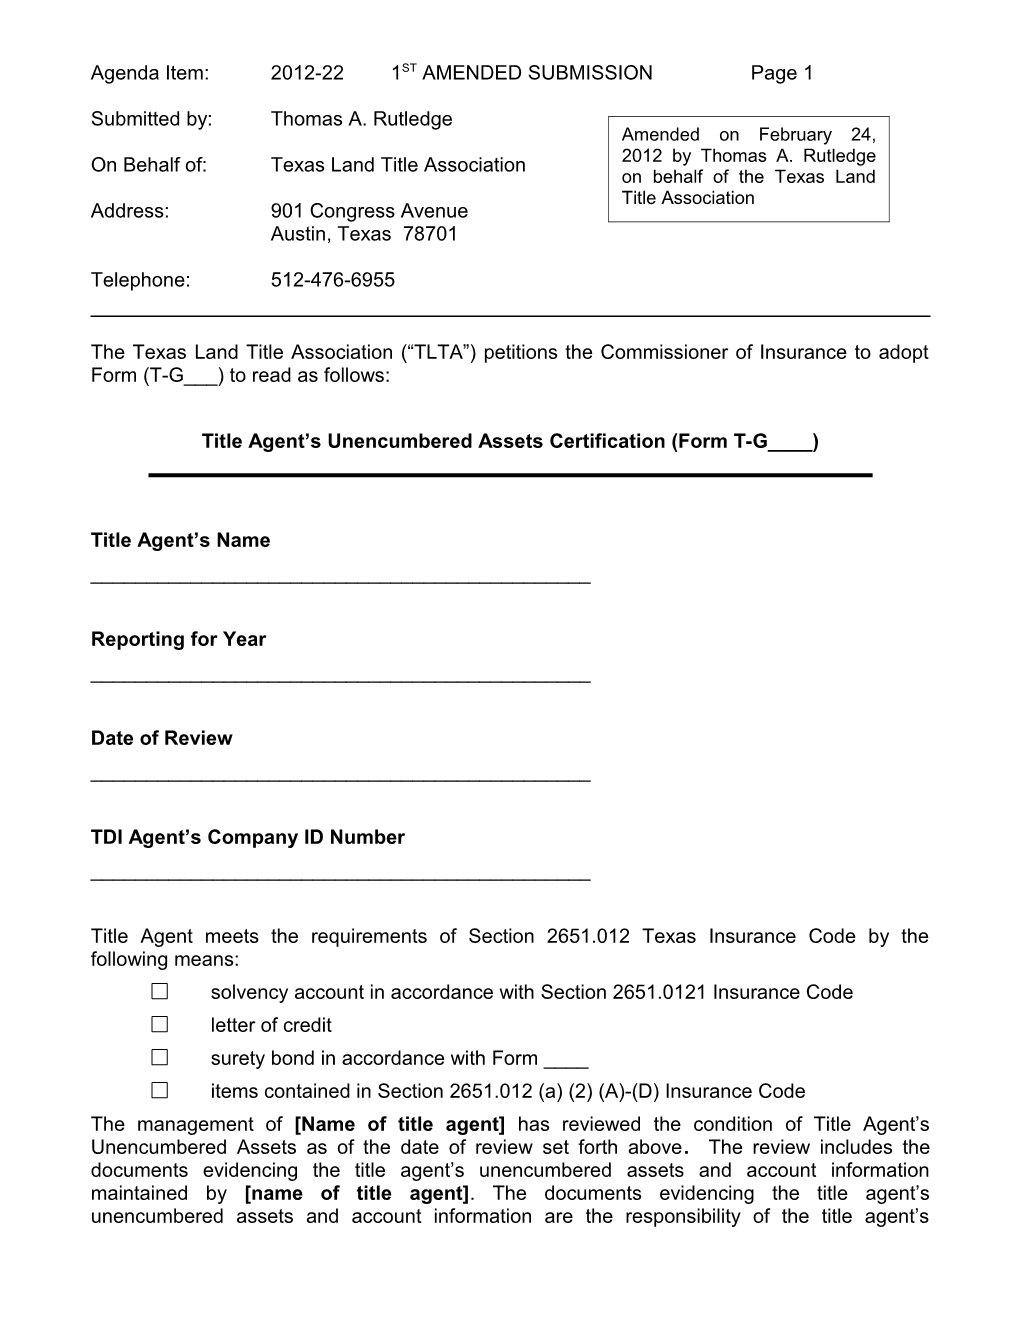 The Texas Land Title Association ( TLTA ) Petitions the Commissioner of Insurance to Amend s1